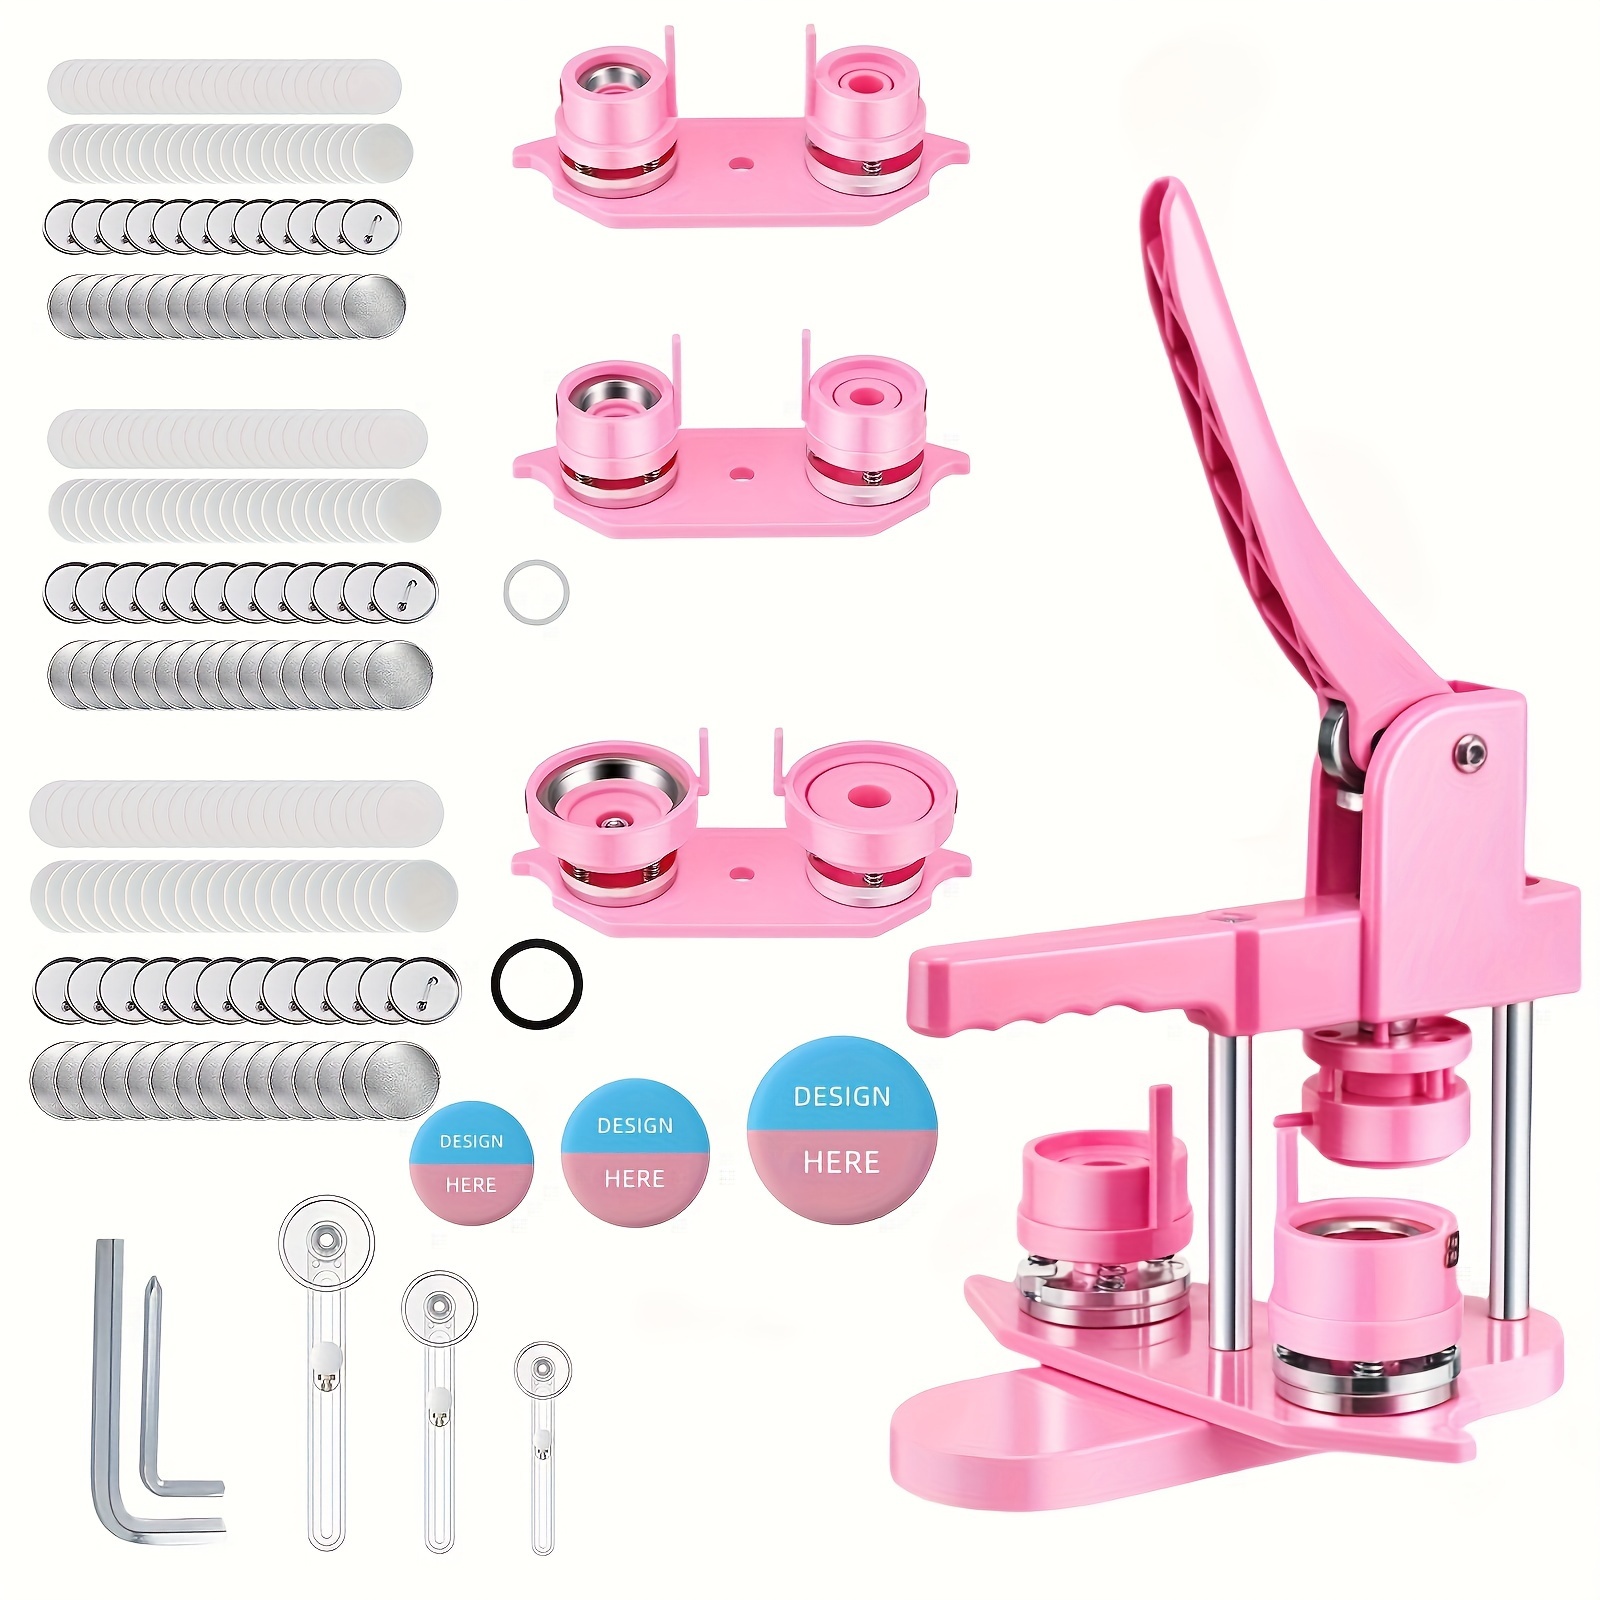 

Diy Button Maker Press Machine: 3 Size Molds (25mm, 32mm, 58mm) - Easy Installation, 100 Pcs Button Parts, Circle Cutter, And Magic Book Included